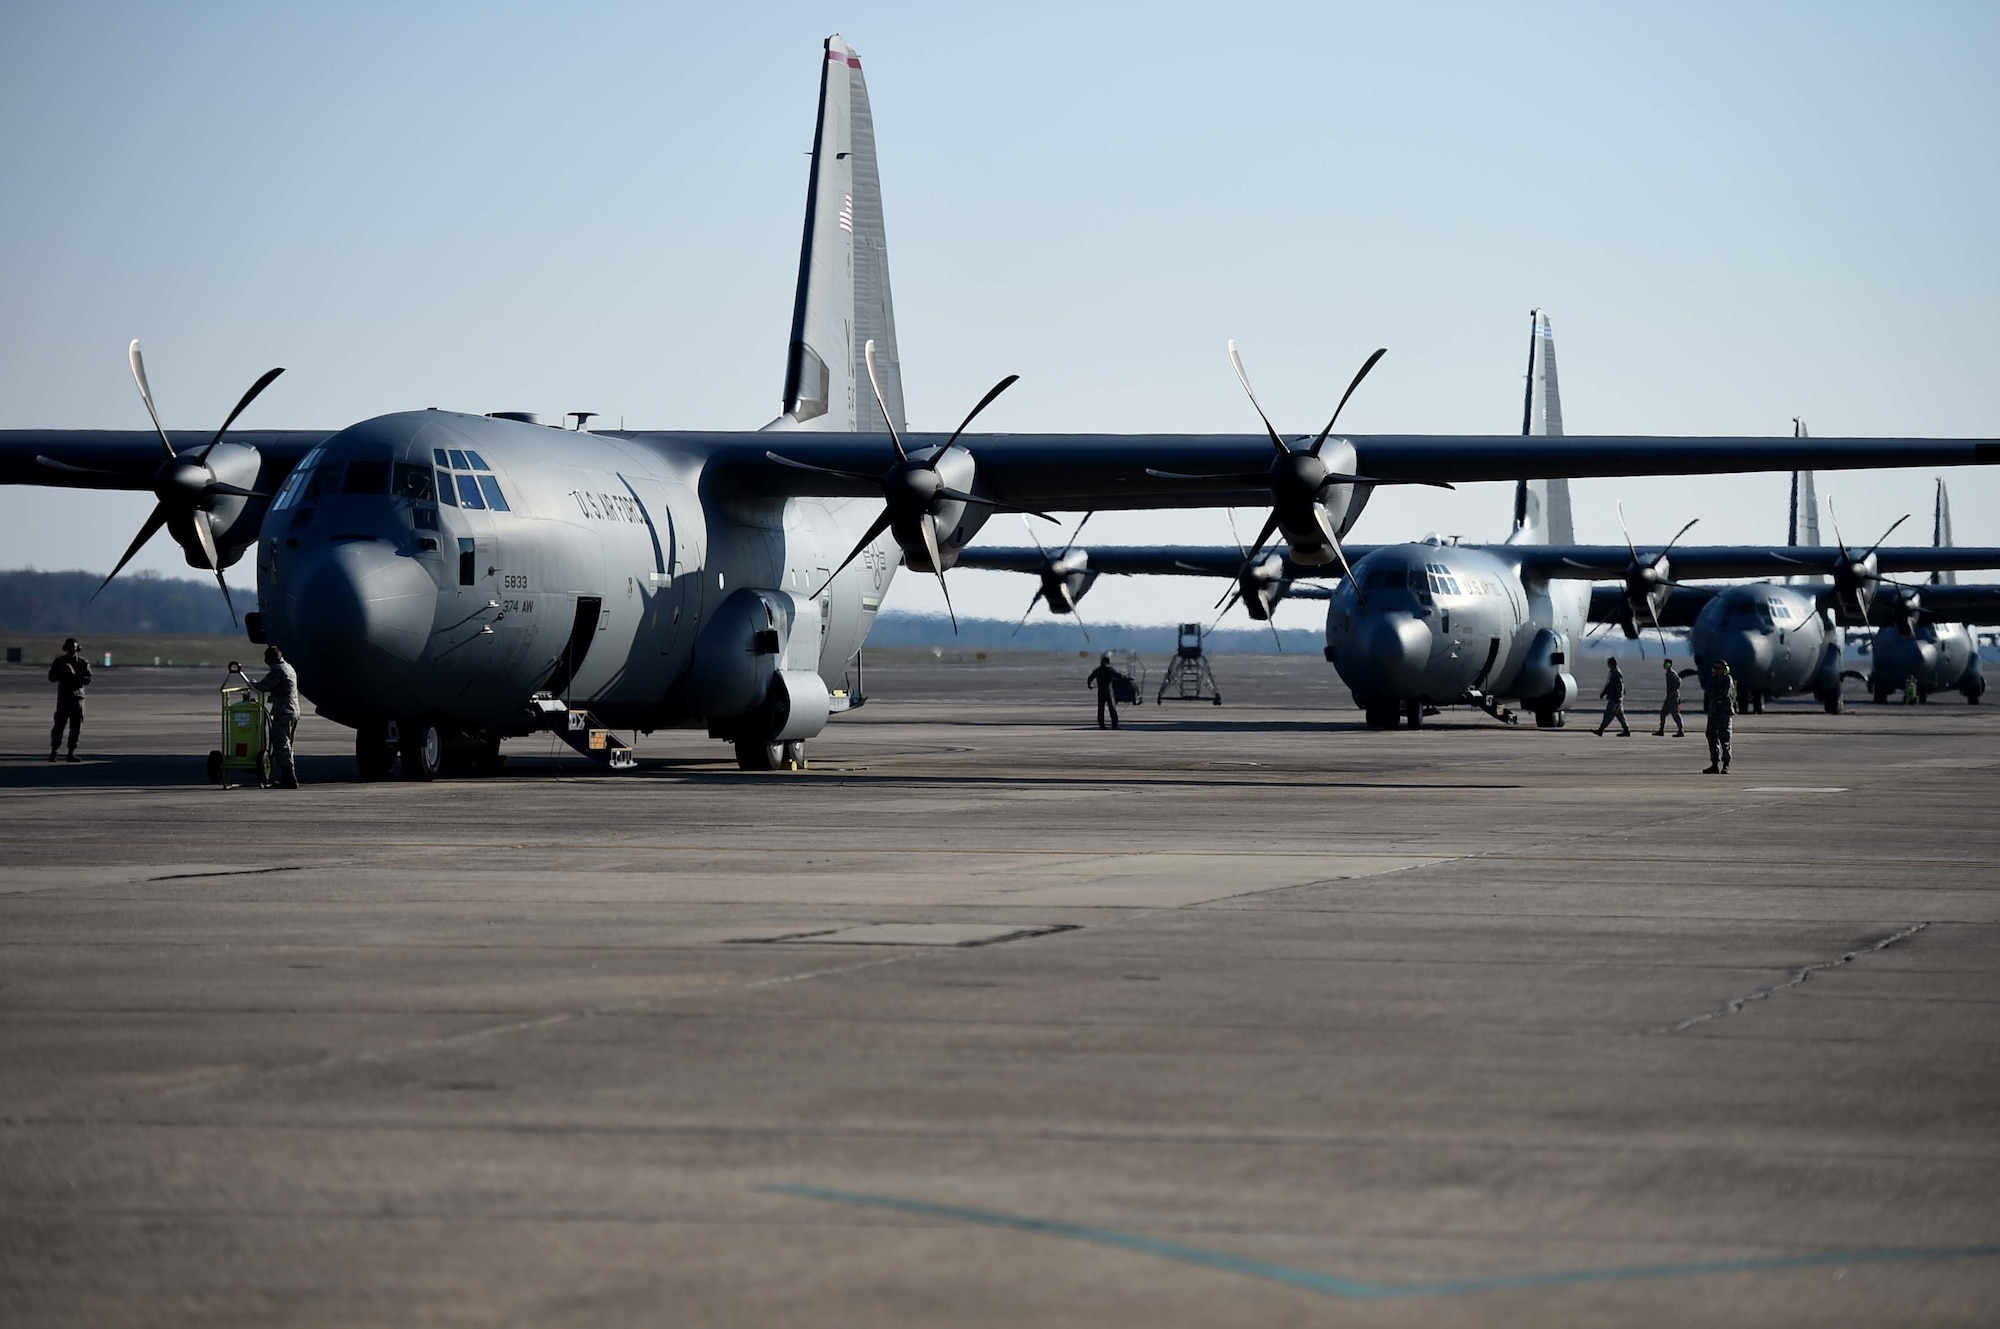 Six C-130s prepare for take-off Mar. 12, 2018 at Little Rock Air Force Base, Ark. Team Little Rock hosted over 65 Airmen from six wings to train together and showcase tactical airlift. Partnerships and interoperability enhance operational effectiveness and mission readiness. (U.S. Air Force photo by Staff Sgt. Dana J. Cable)